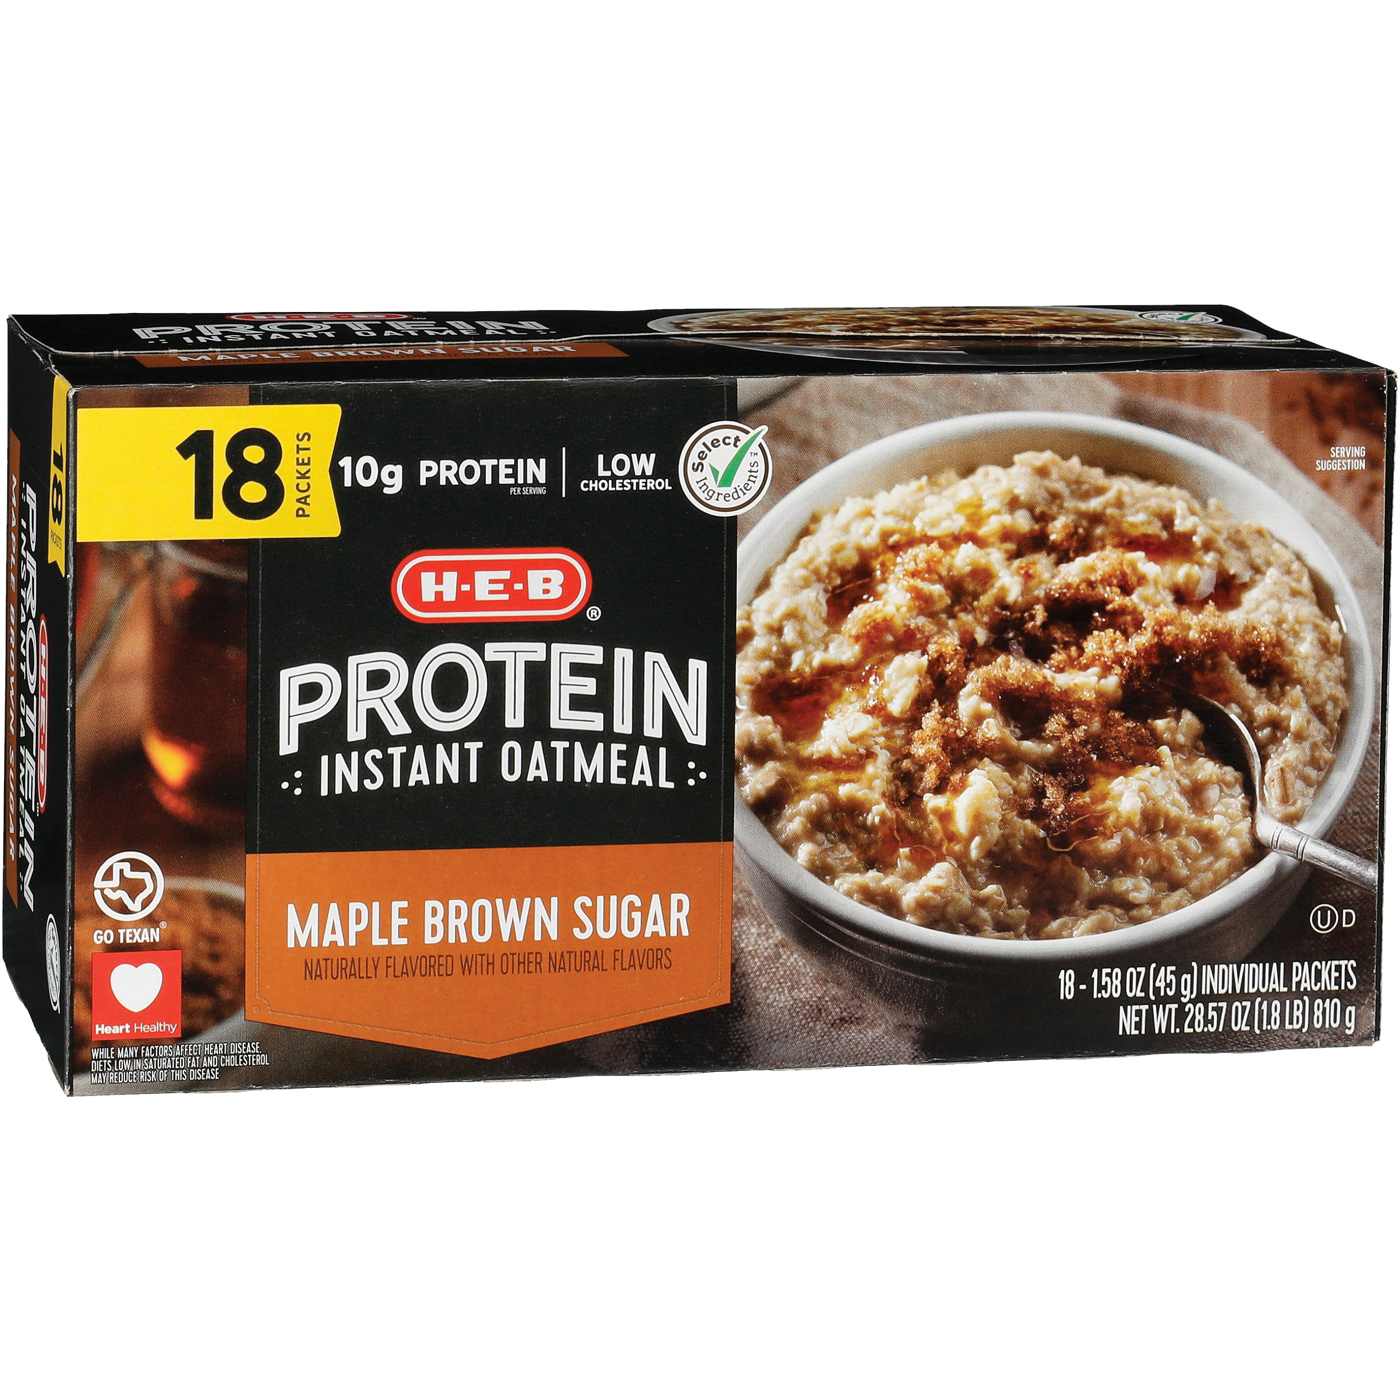 H-E-B 10g Protein Instant Oatmeal - Maple Brown Sugar; image 2 of 2